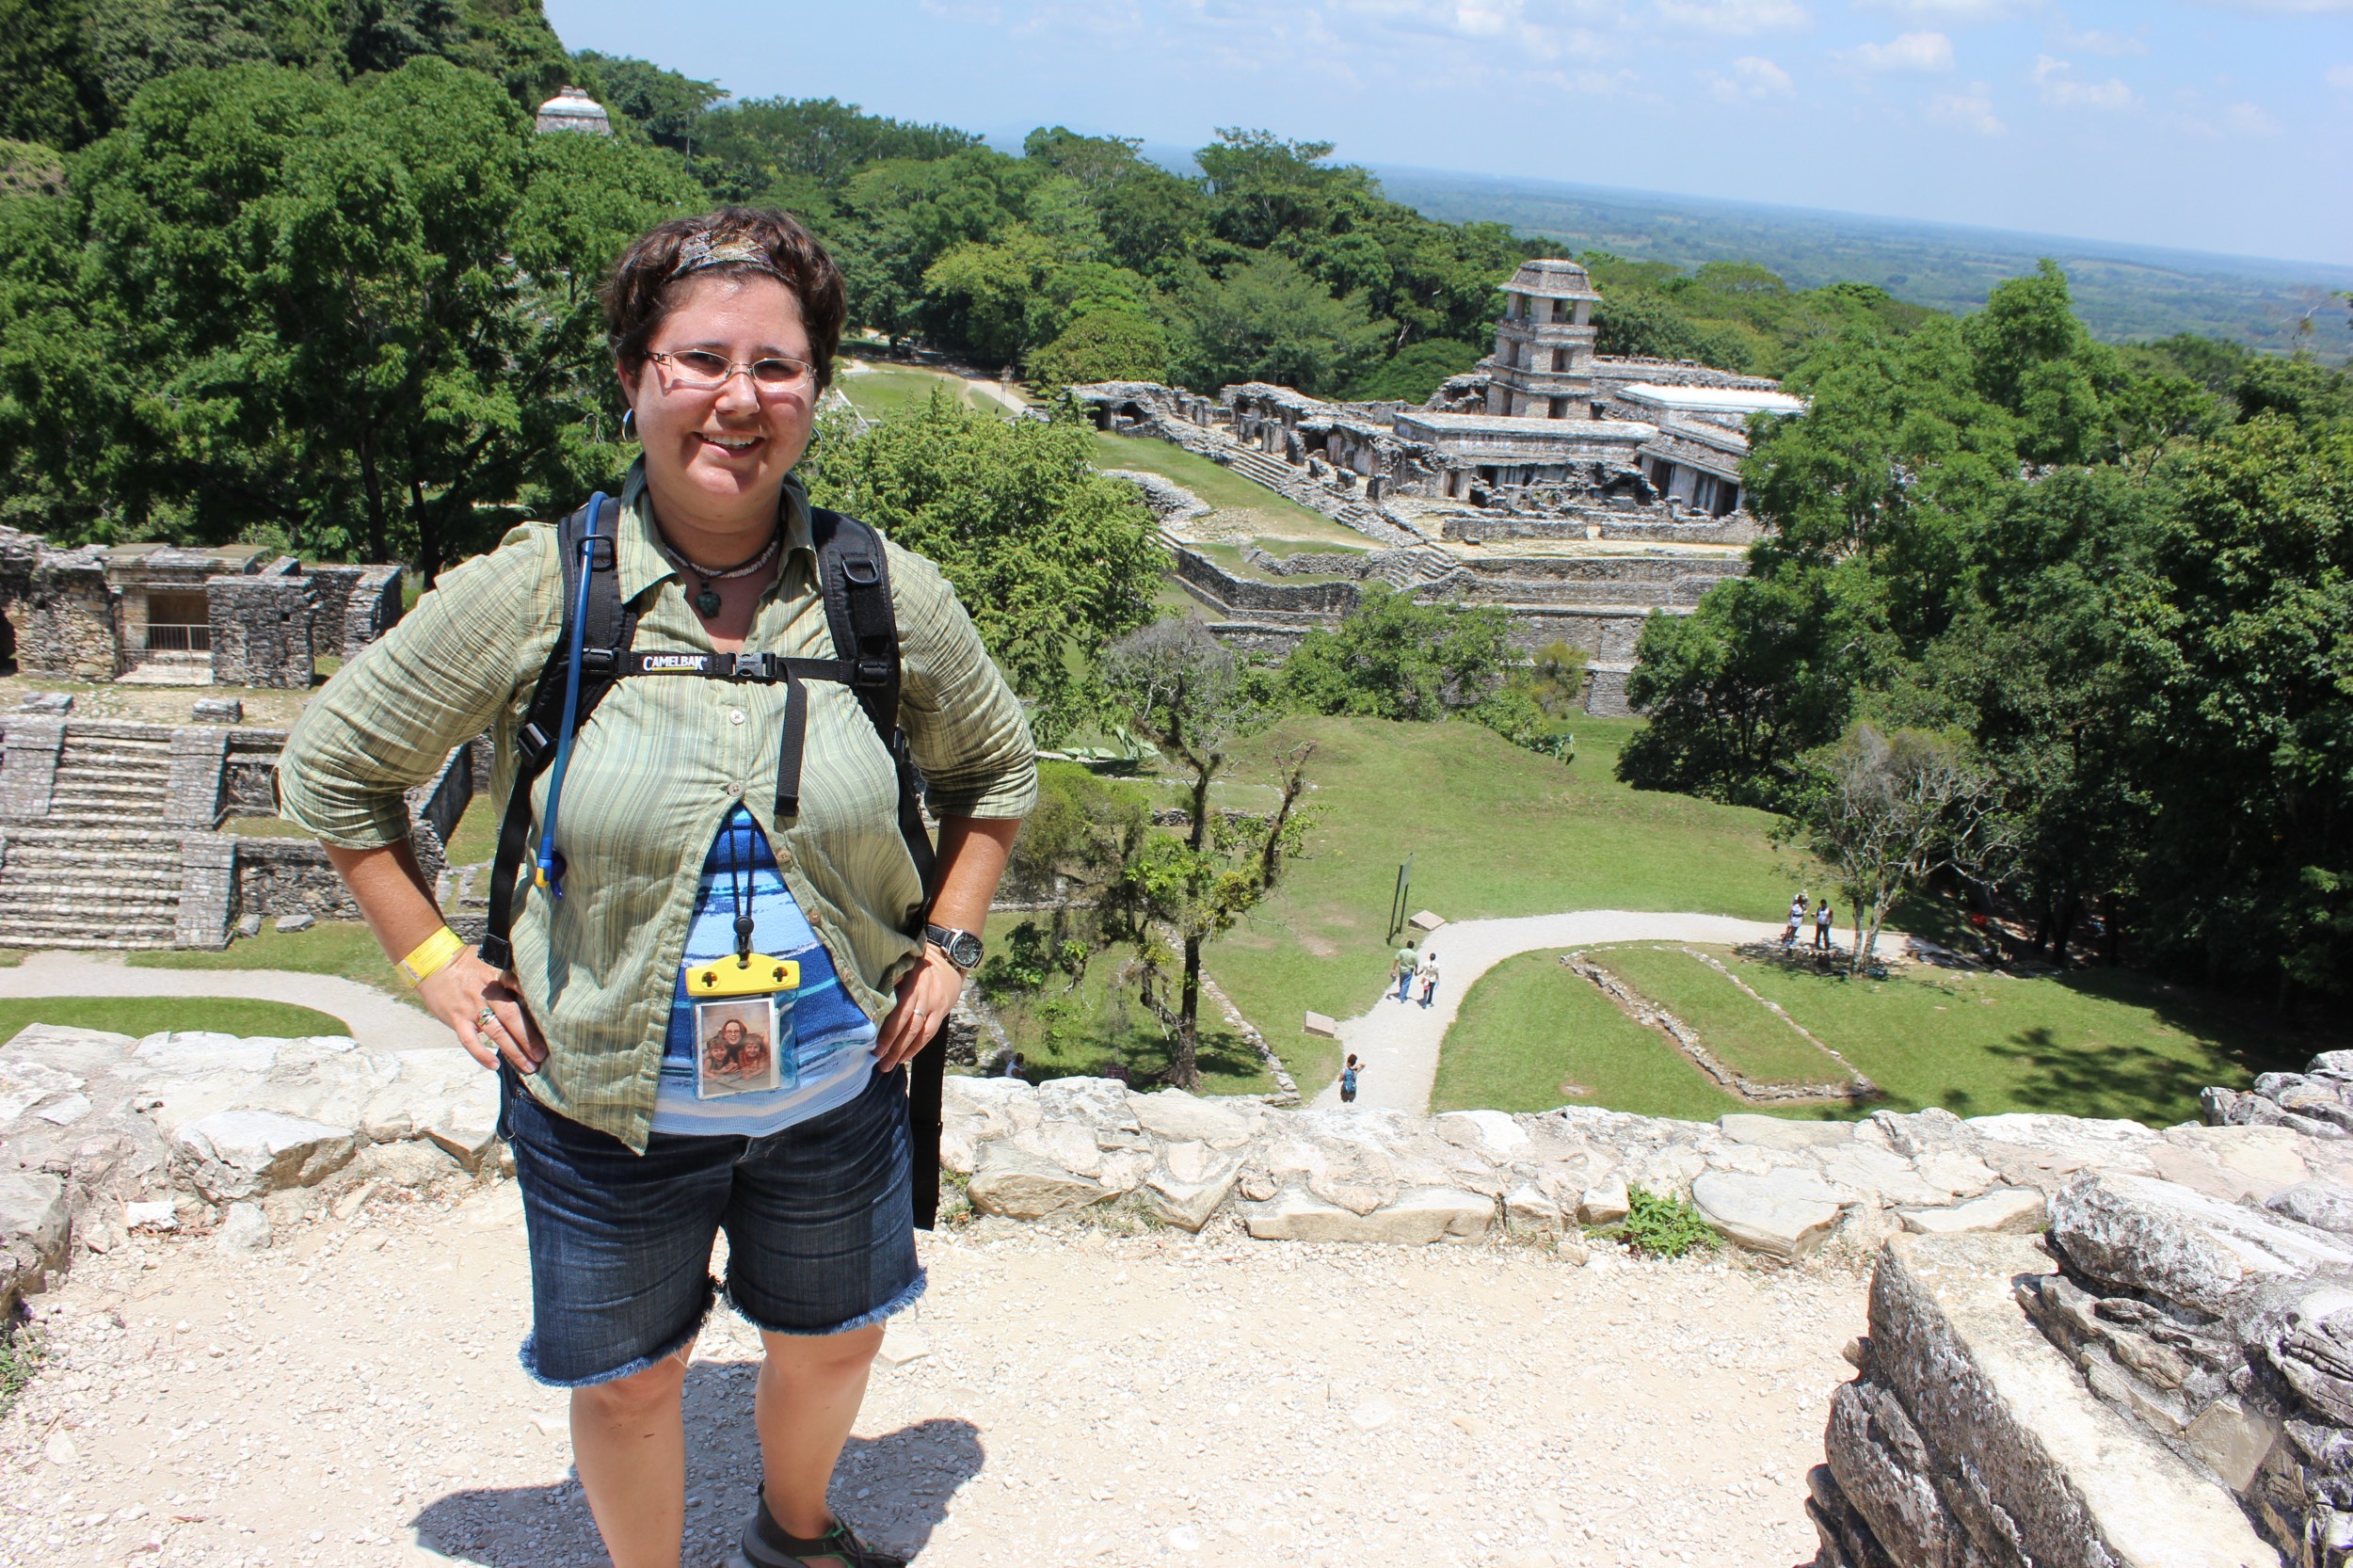 Triumph! At the top of the Temple of the Sun, and I climbed it voluntarily!